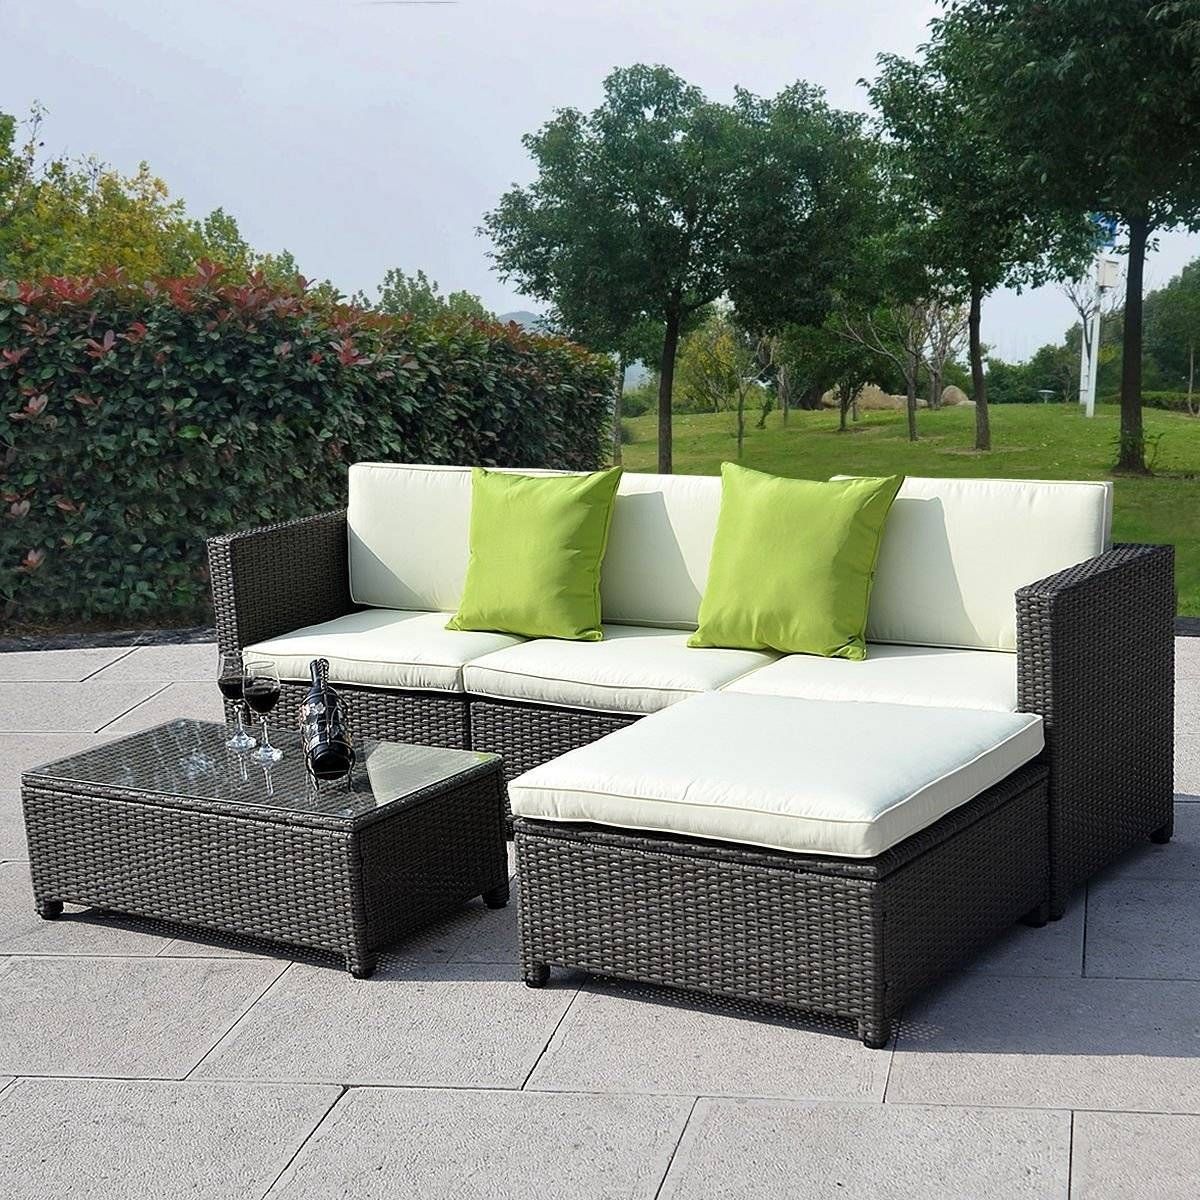 Outstanding Outdoor Patio Sectional Furniture Sets Ideas Intended For Cheap Patio Sofas (View 2 of 30)